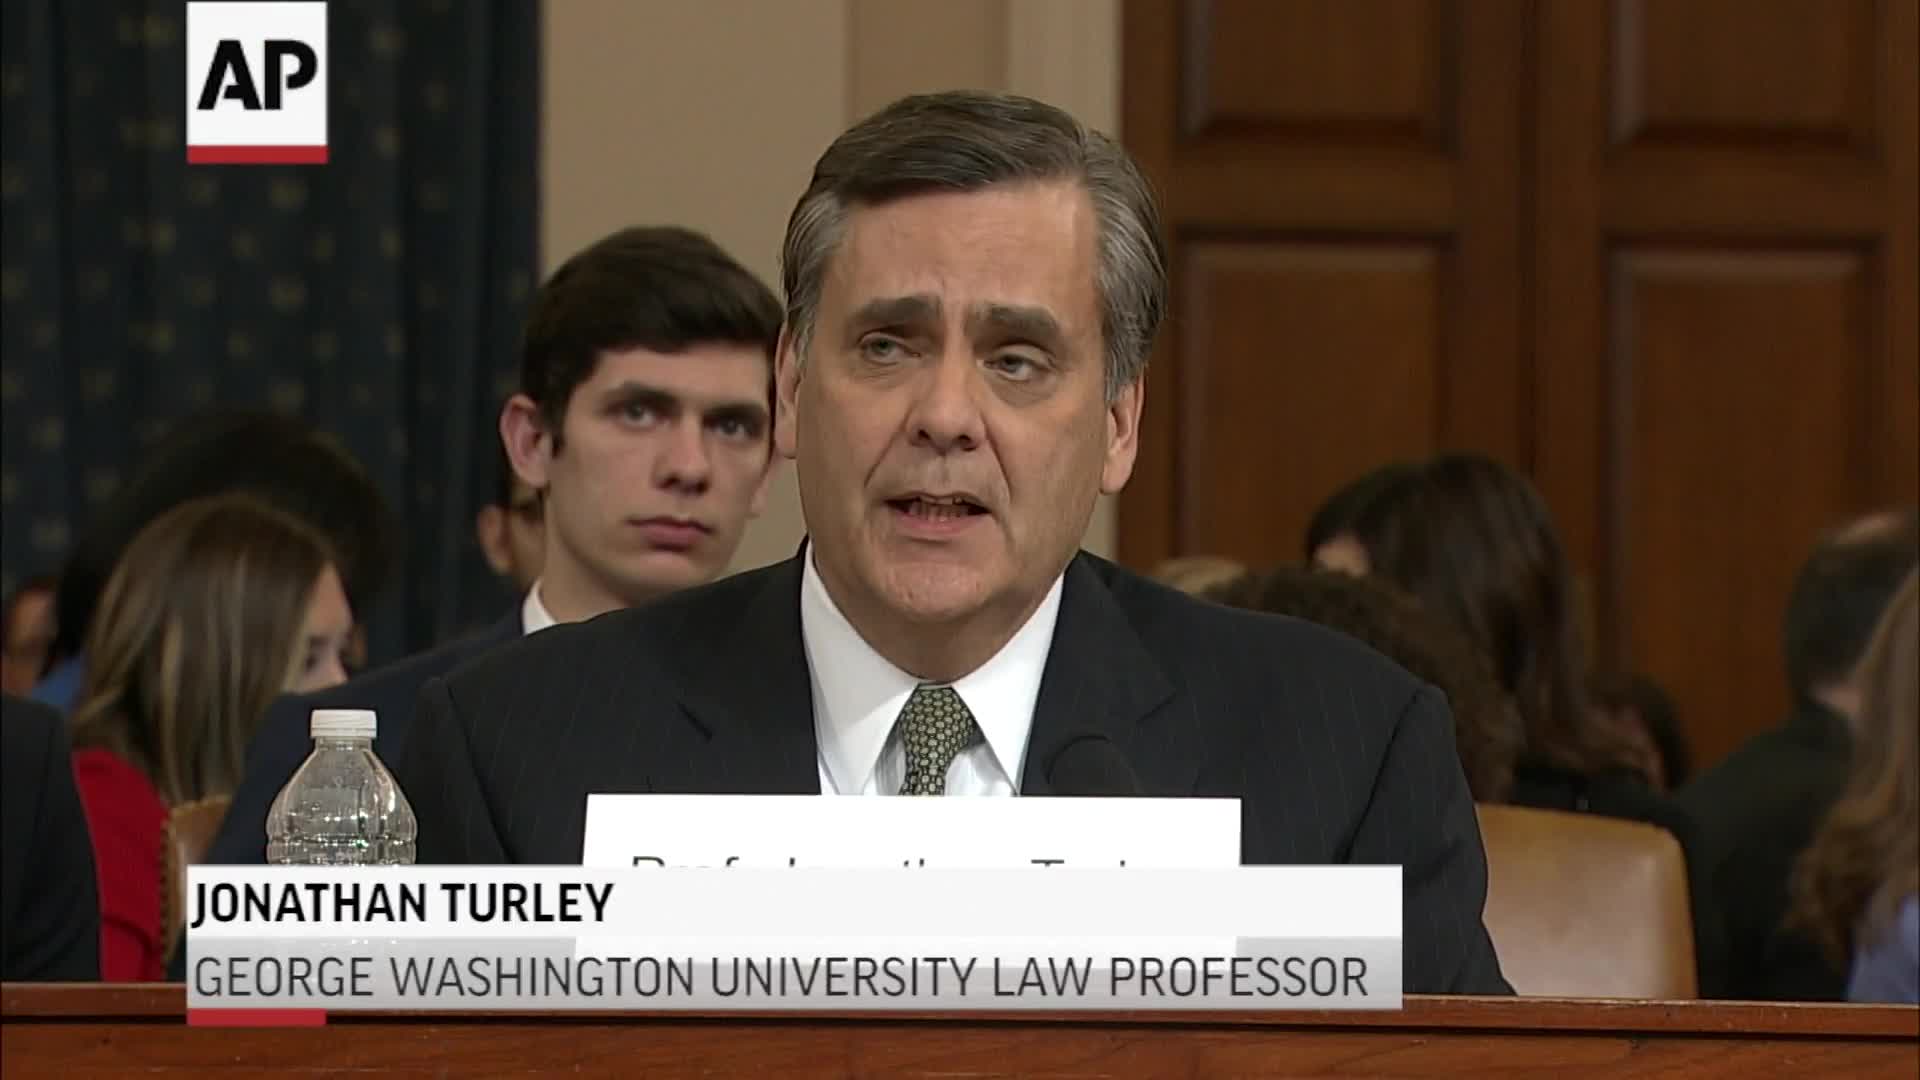 Anti-impeachment witness, Jonathan Turley, says he has received threats since hearing